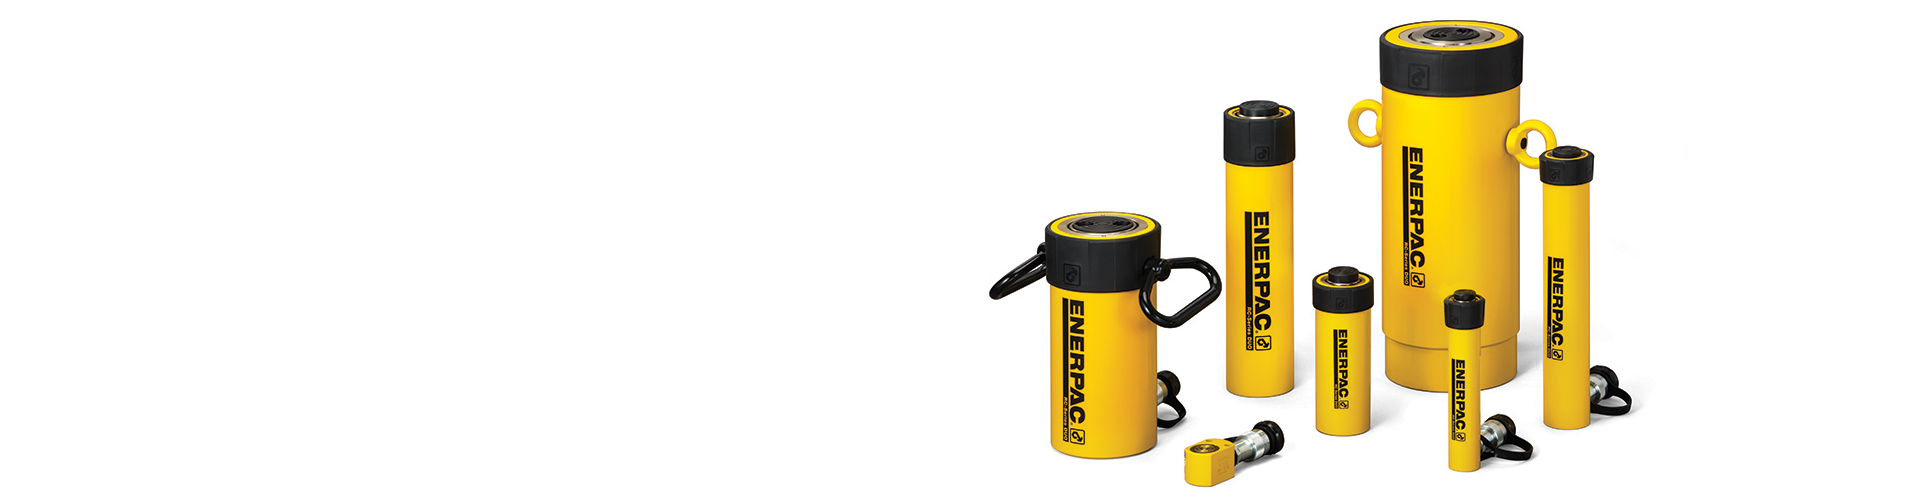 Enerpac New Upgraded RC-Series Hydraulic Cylinders